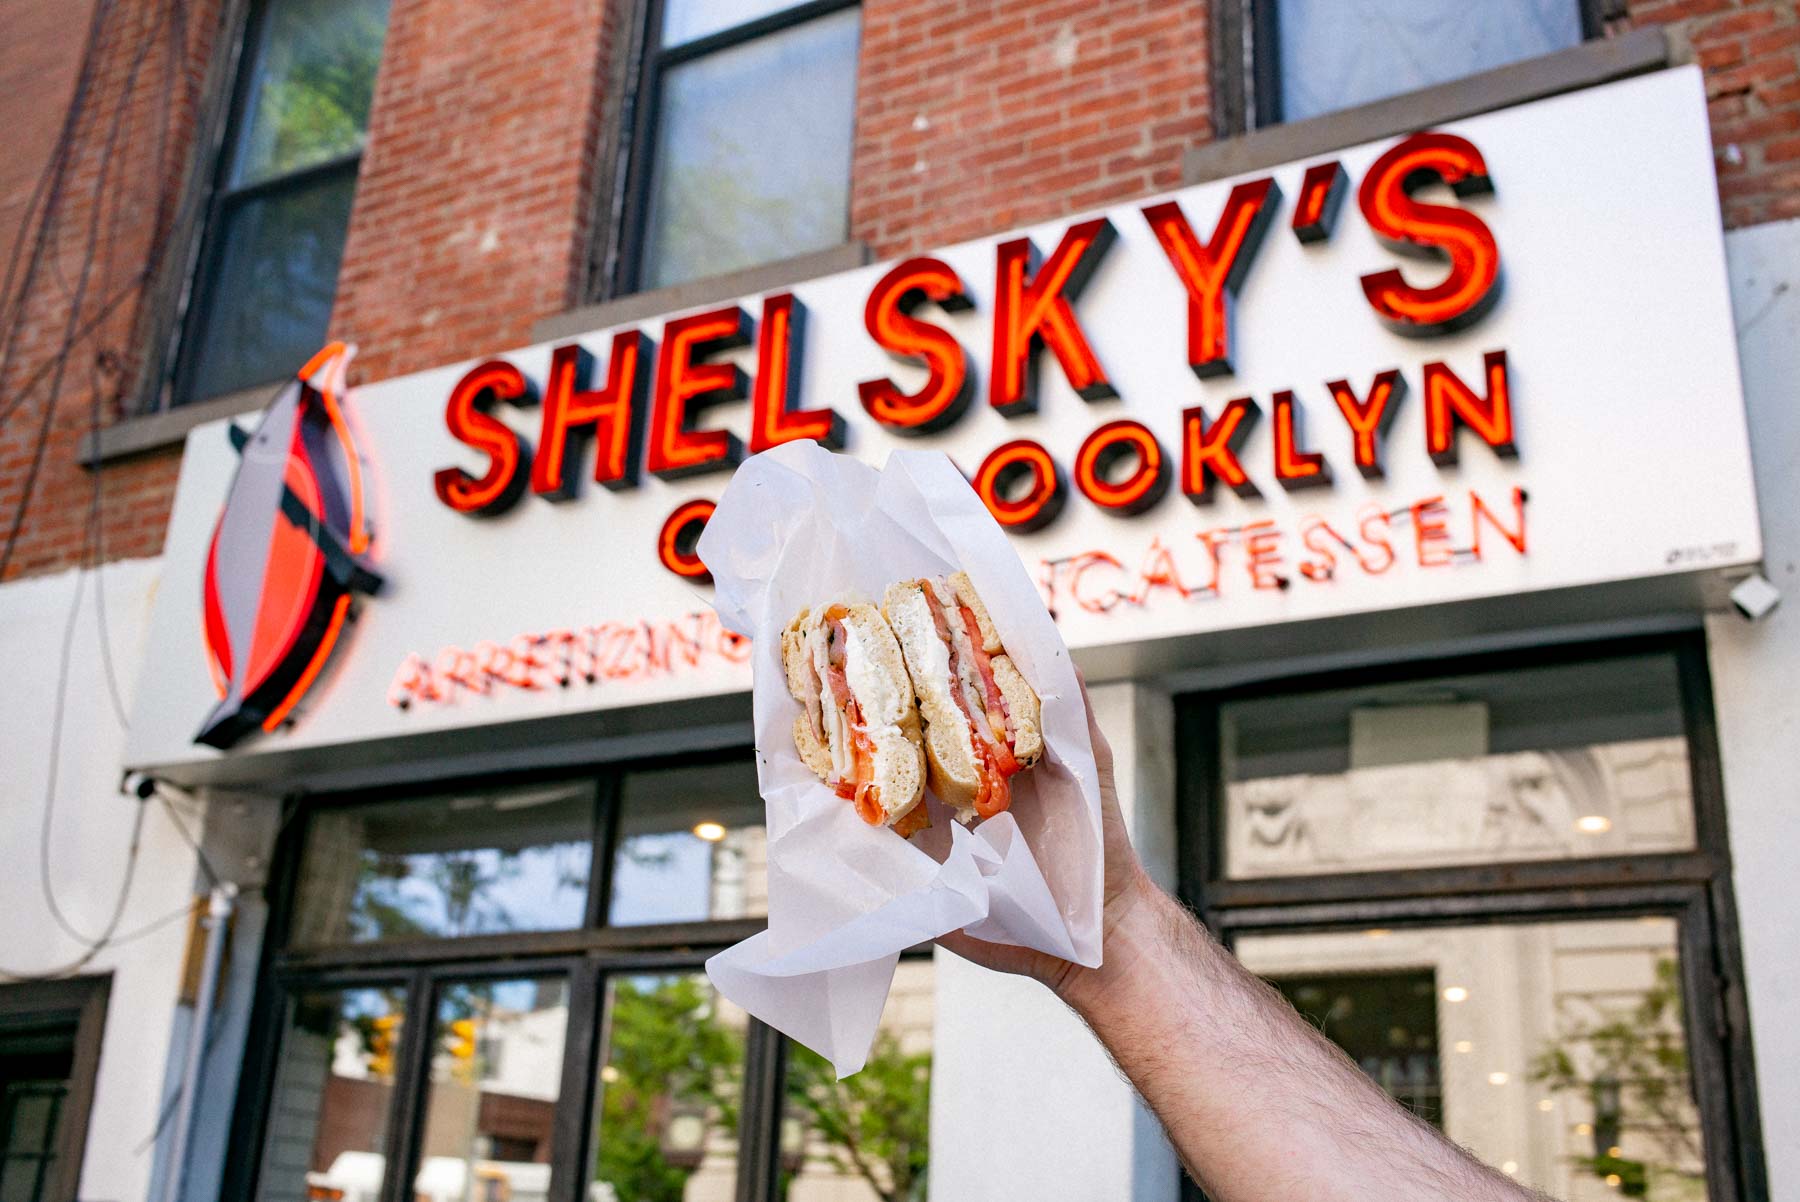 Shelsky's of Brooklyn Bagels and lox